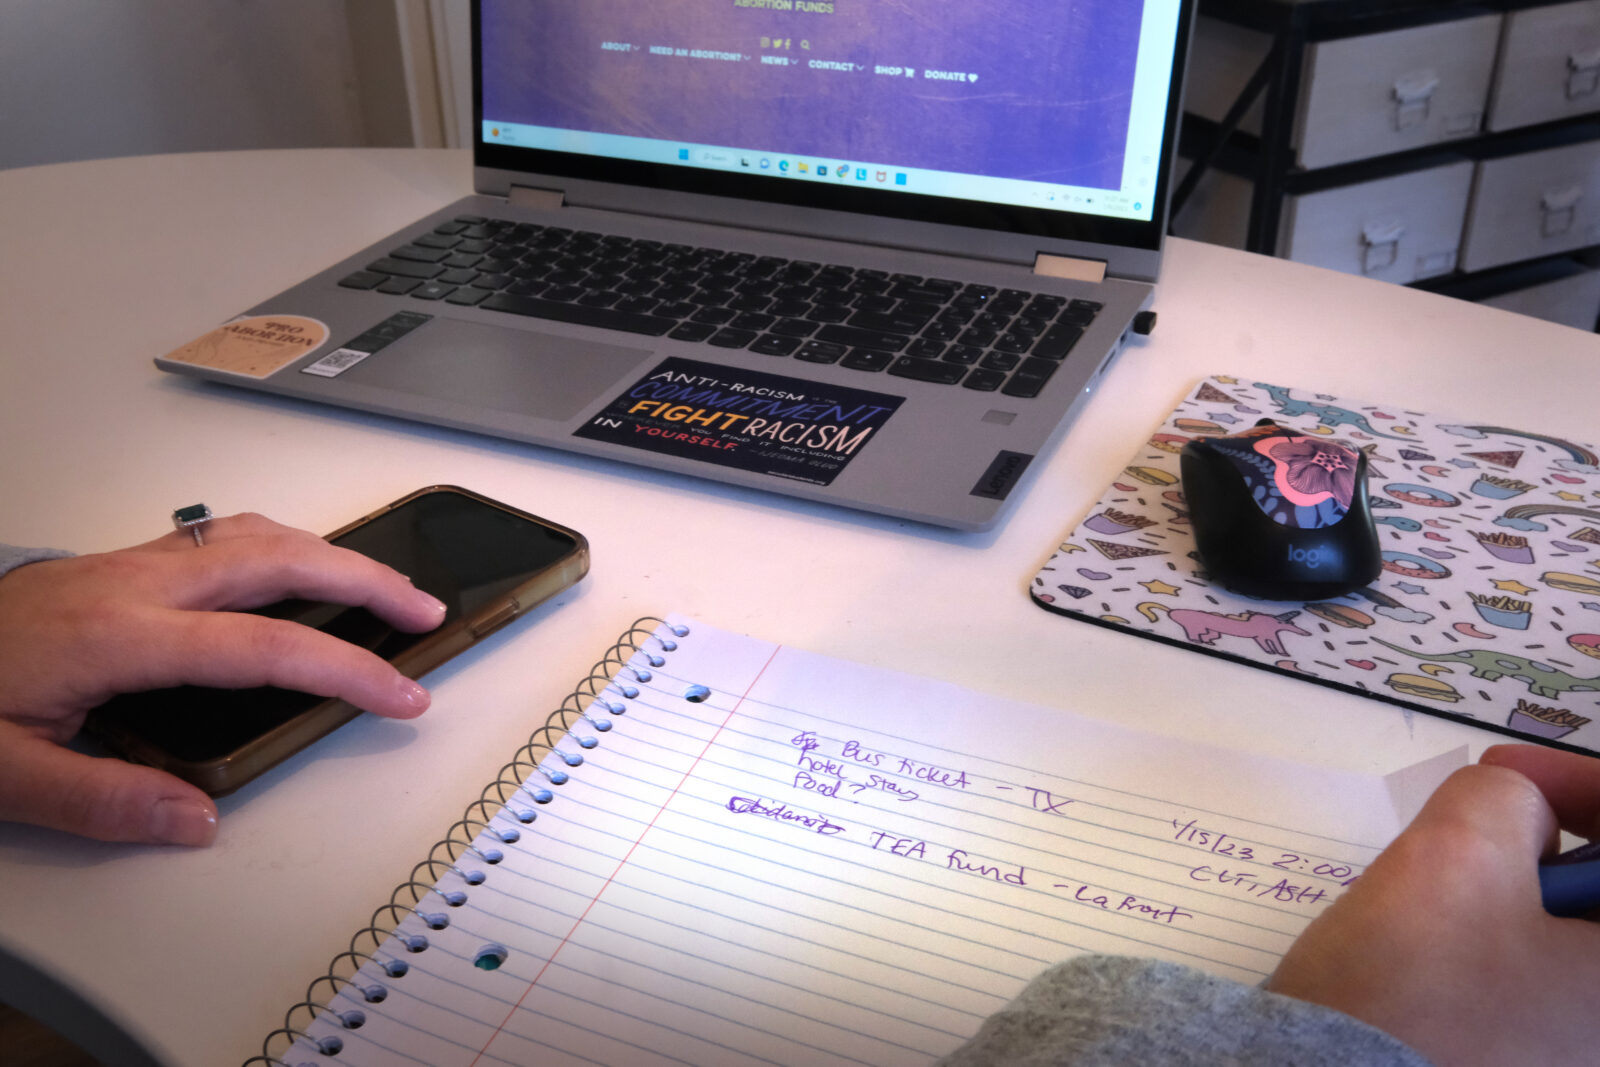 A note pad with purple writing on it, a laptop, computer mouse and cell phone sit on a white desk.